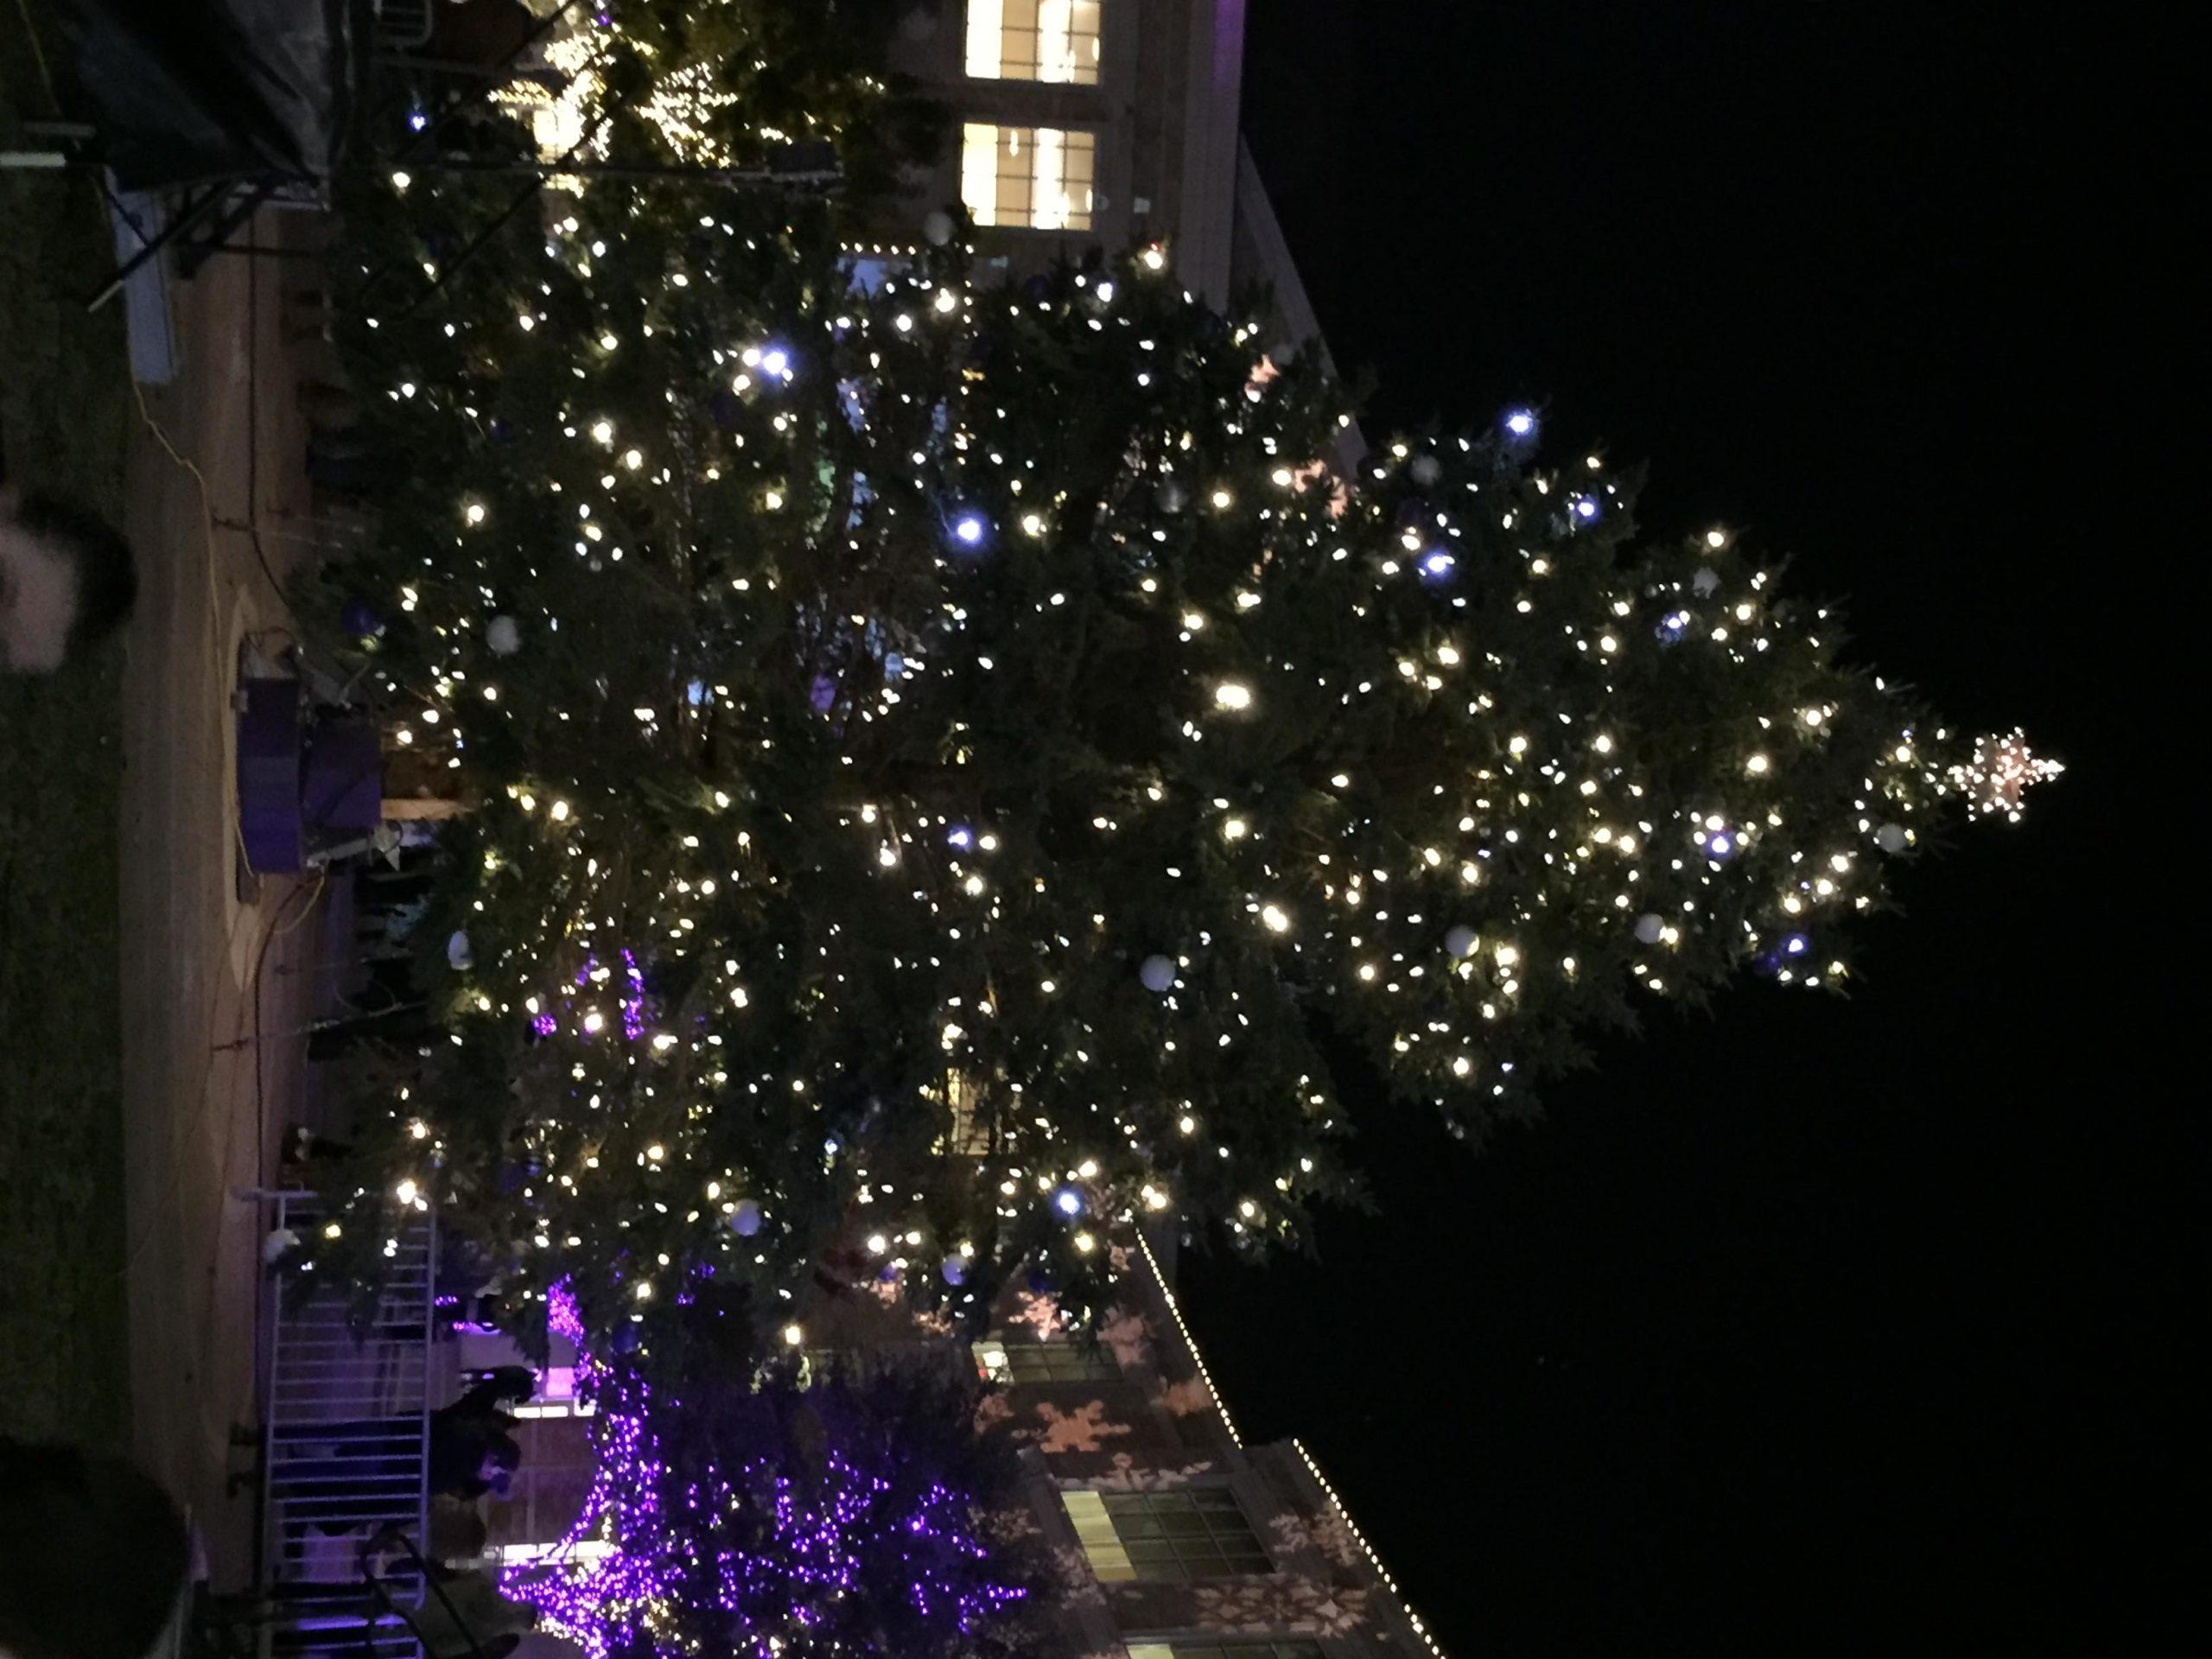 TCU+celebrated+the+beginning+of+the+holiday+season+by+lighting+a+43+foot+Christmas+tree.+